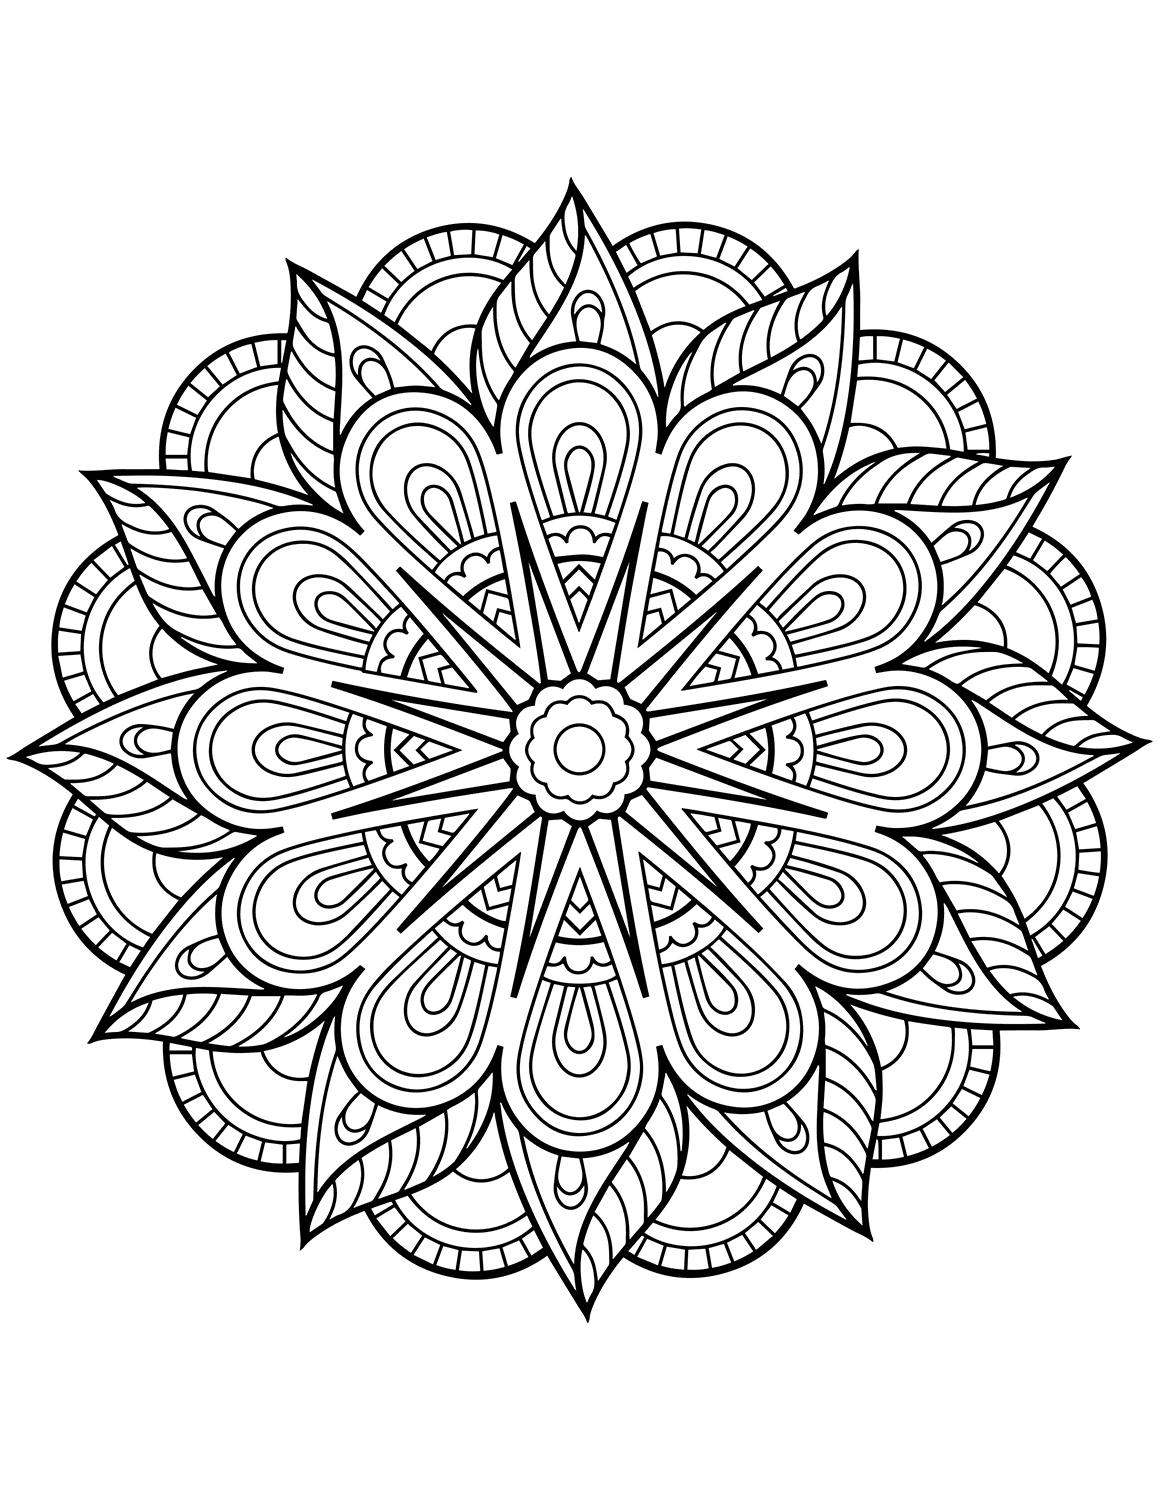 flower-mandala-coloring-pages-best-coloring-pages-for-kids